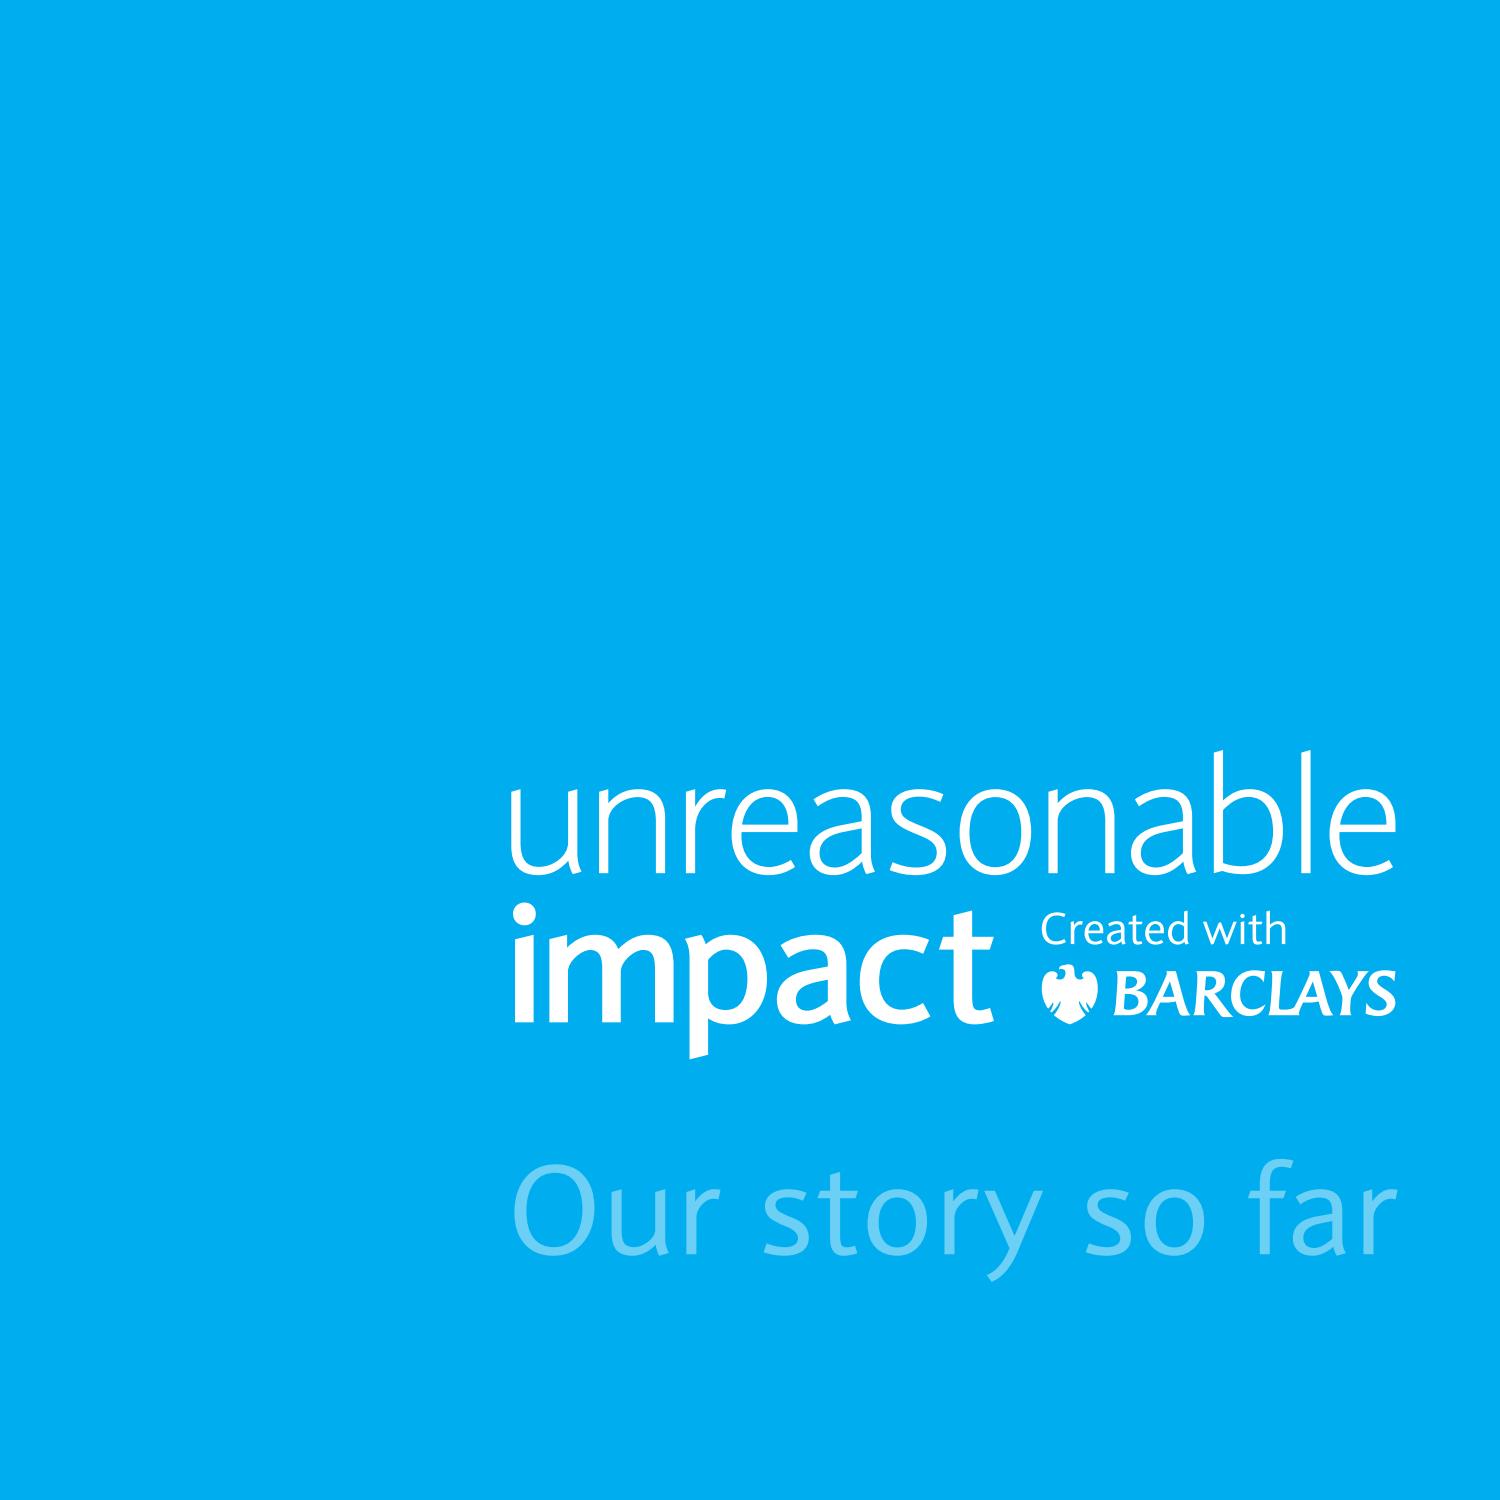 Unreasonable Impact report: Our story so far - Logo - https://s41078.pcdn.co/wp-content/uploads/2020/07/Report_Barclays.jpg